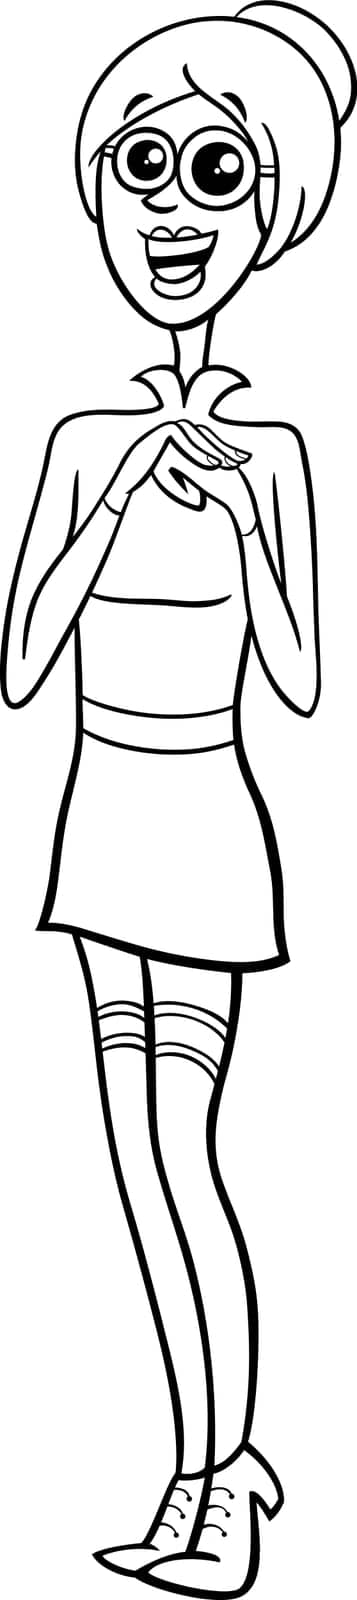 Cartoon illustration of girl or young woman comic character coloring page